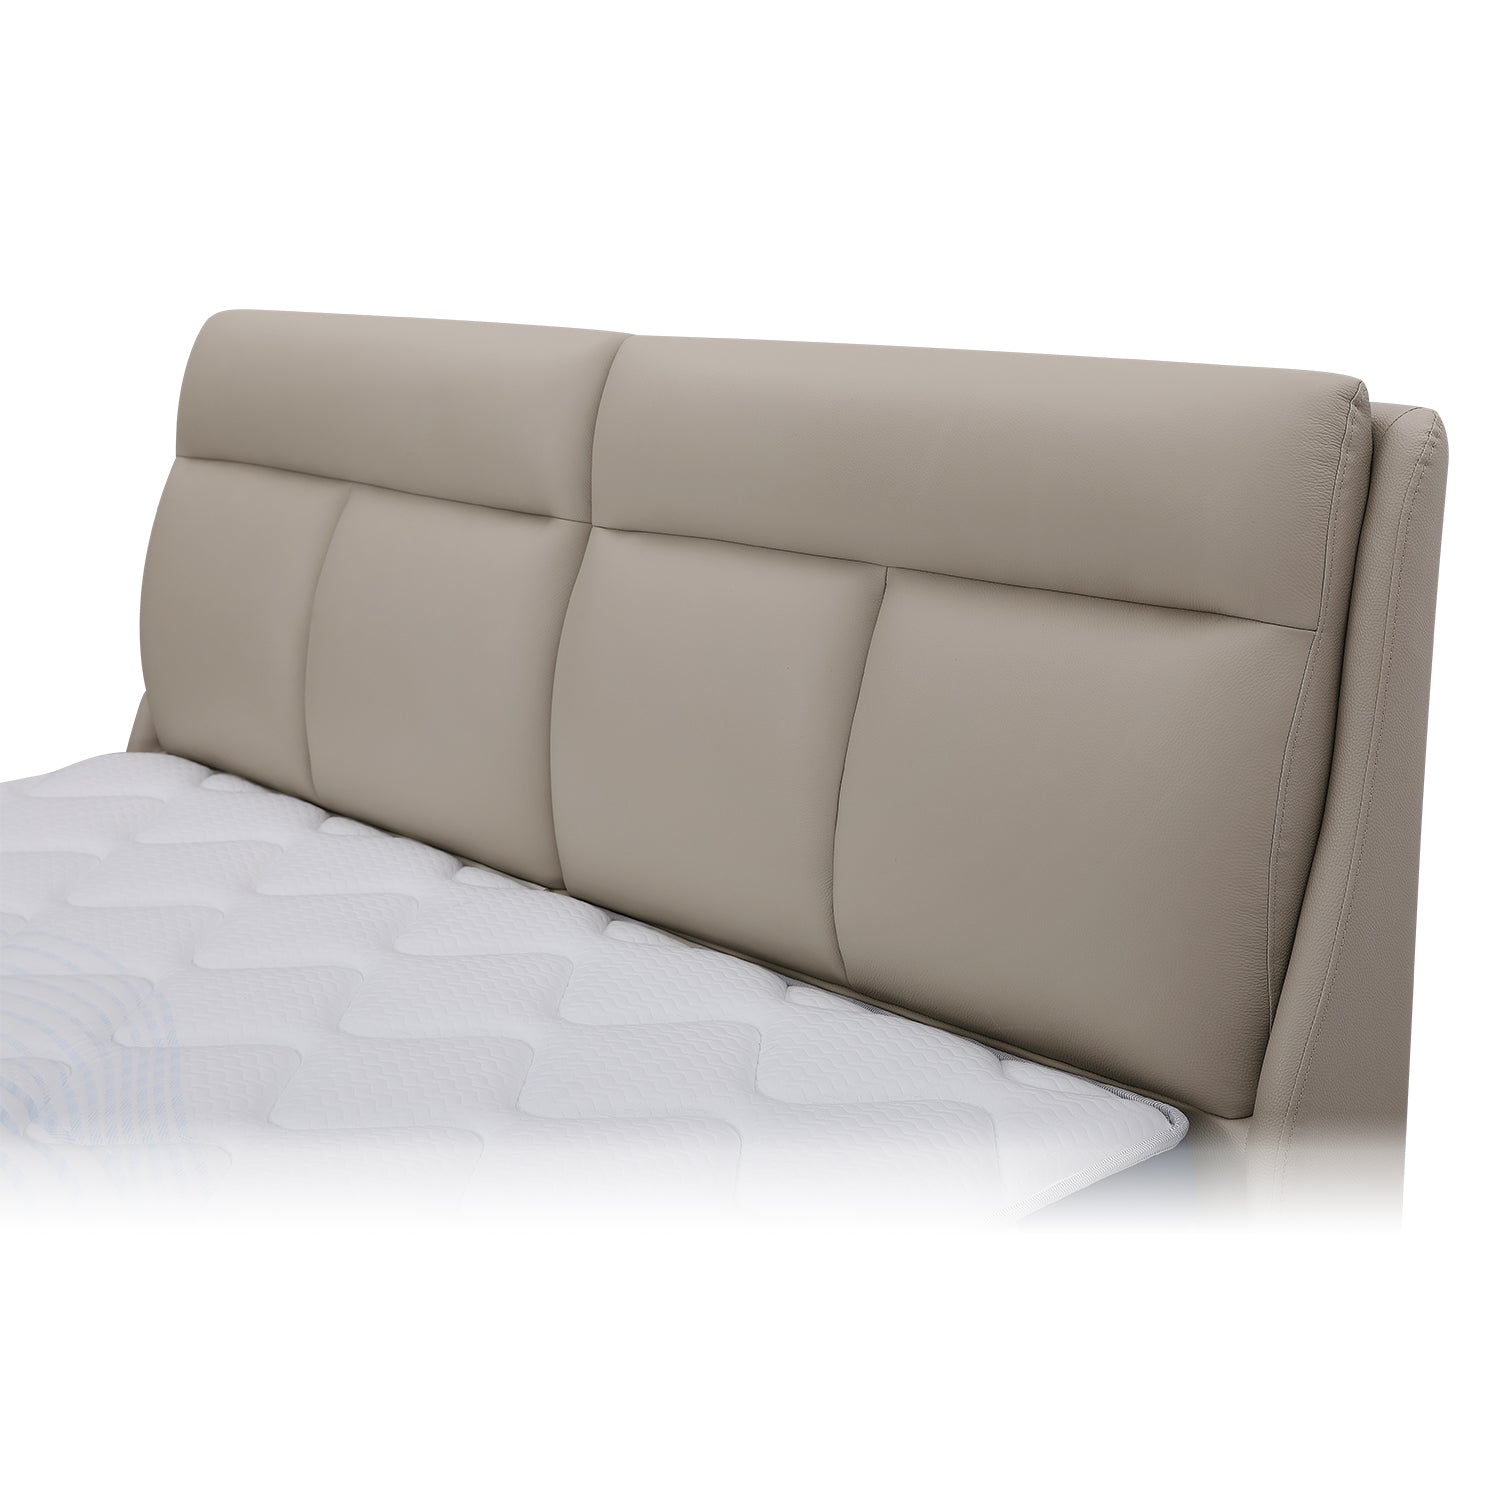 DeRUCCI Bed Frame BOC1 - 002 headboard in top layer leather, featuring a padded, segmented design with a visible mattress.